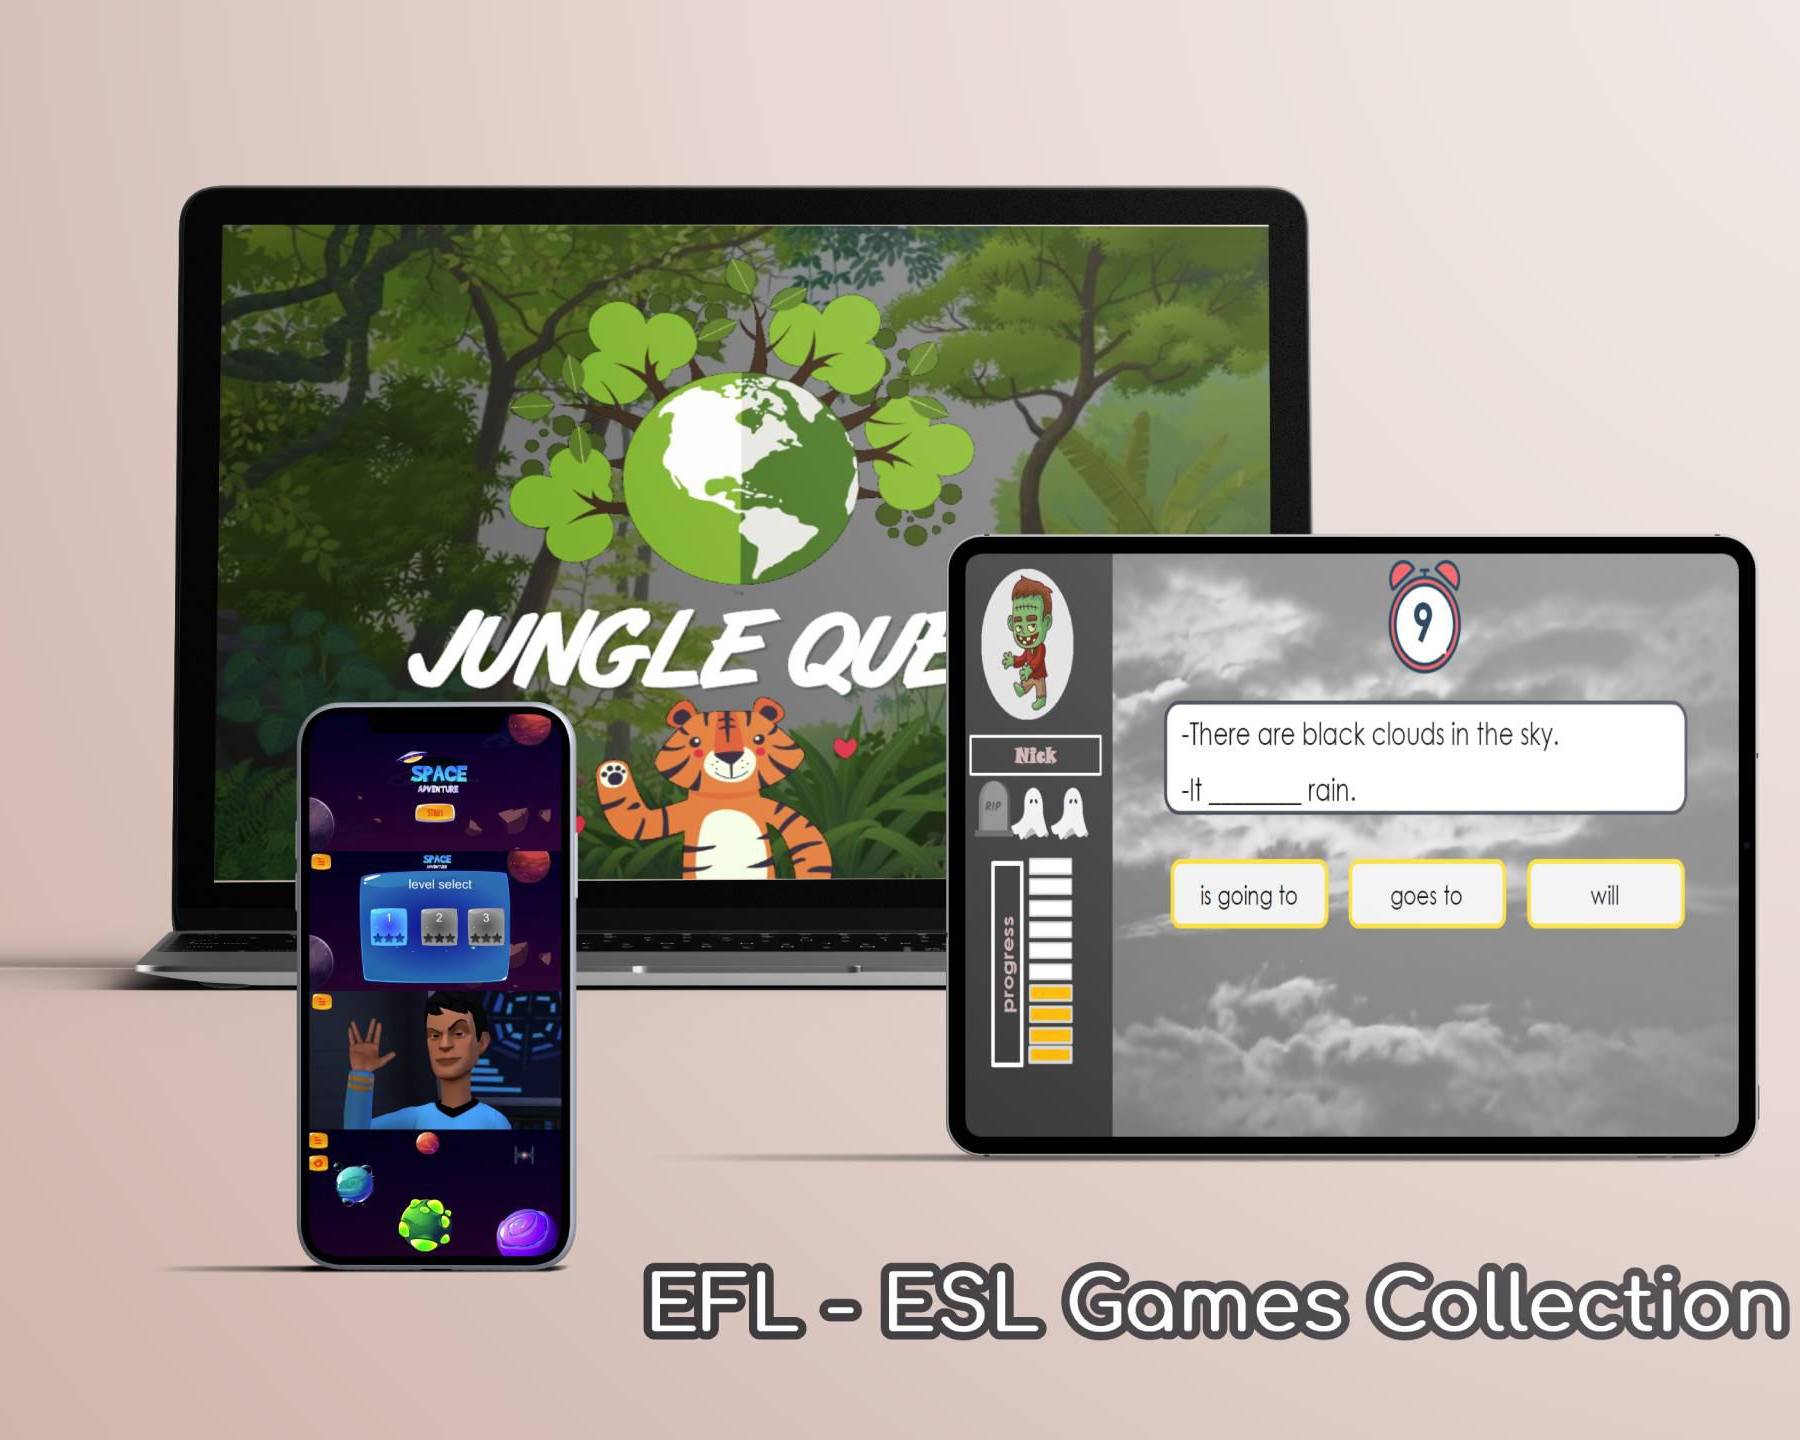 EFL/ESL Games Collection promo picture